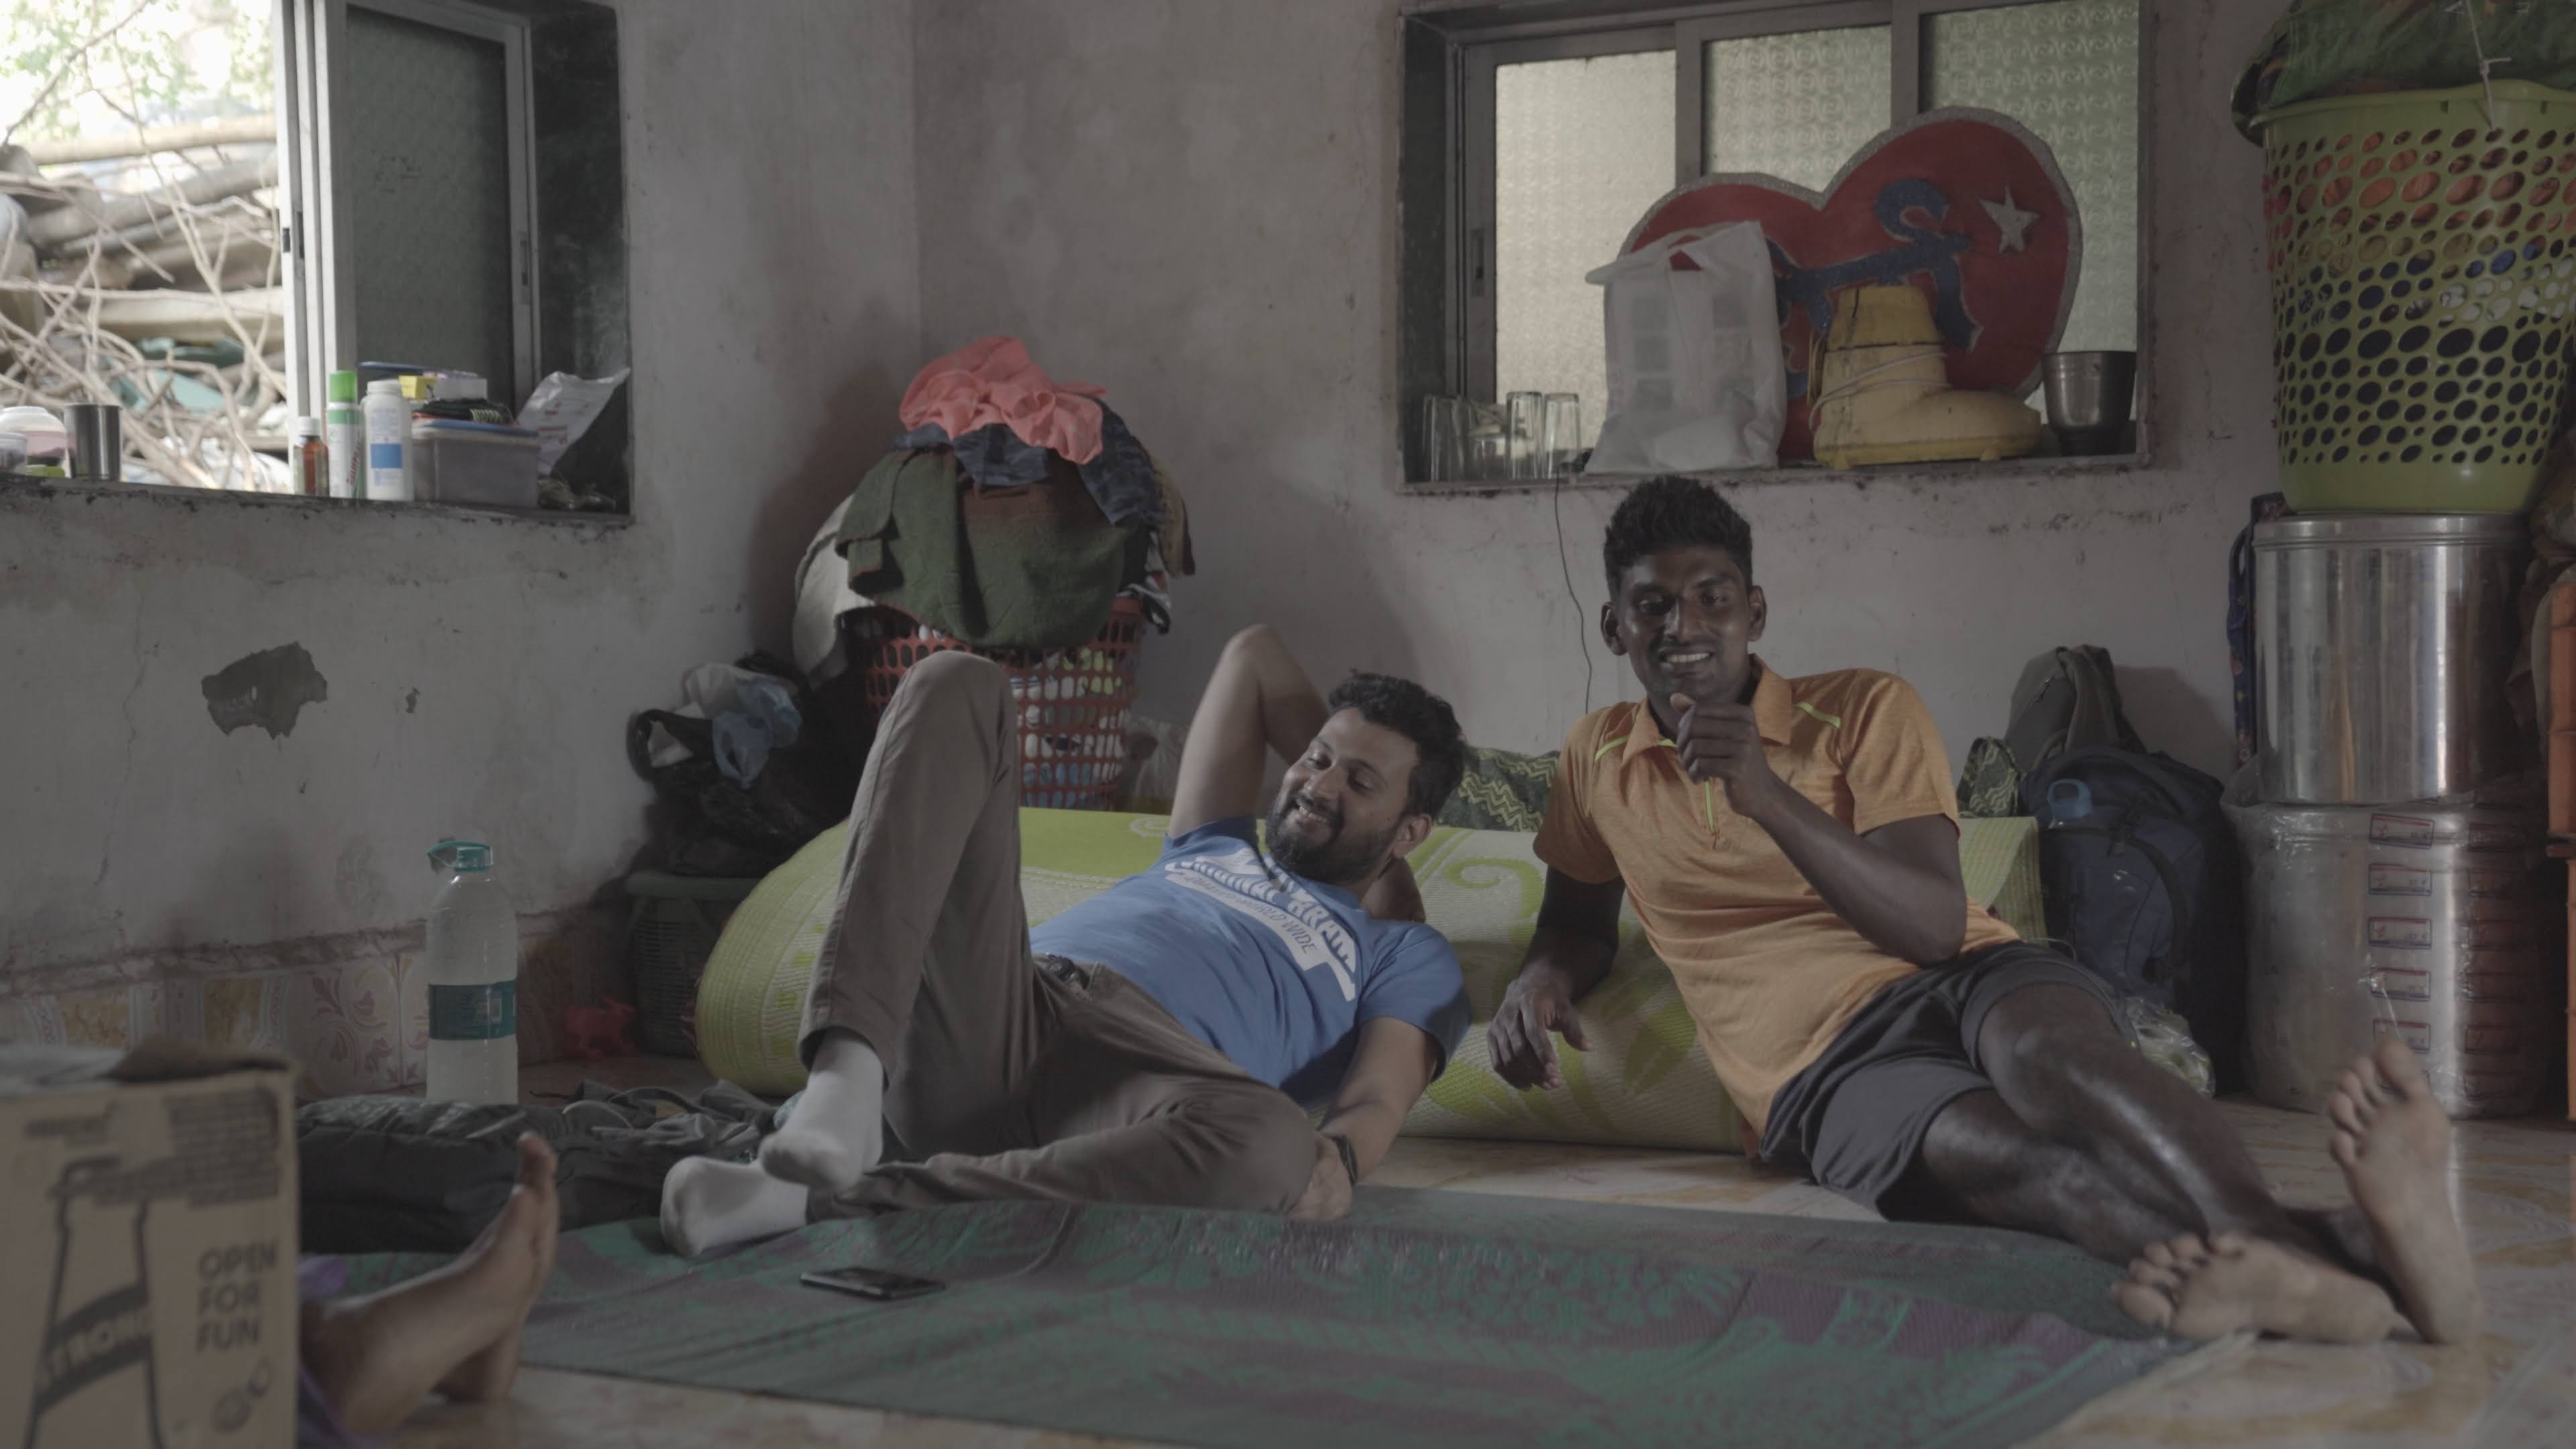 Interiors. Two young Indian men rest on the floor against a pad. They smile and seem to be talking to another person in front of them.